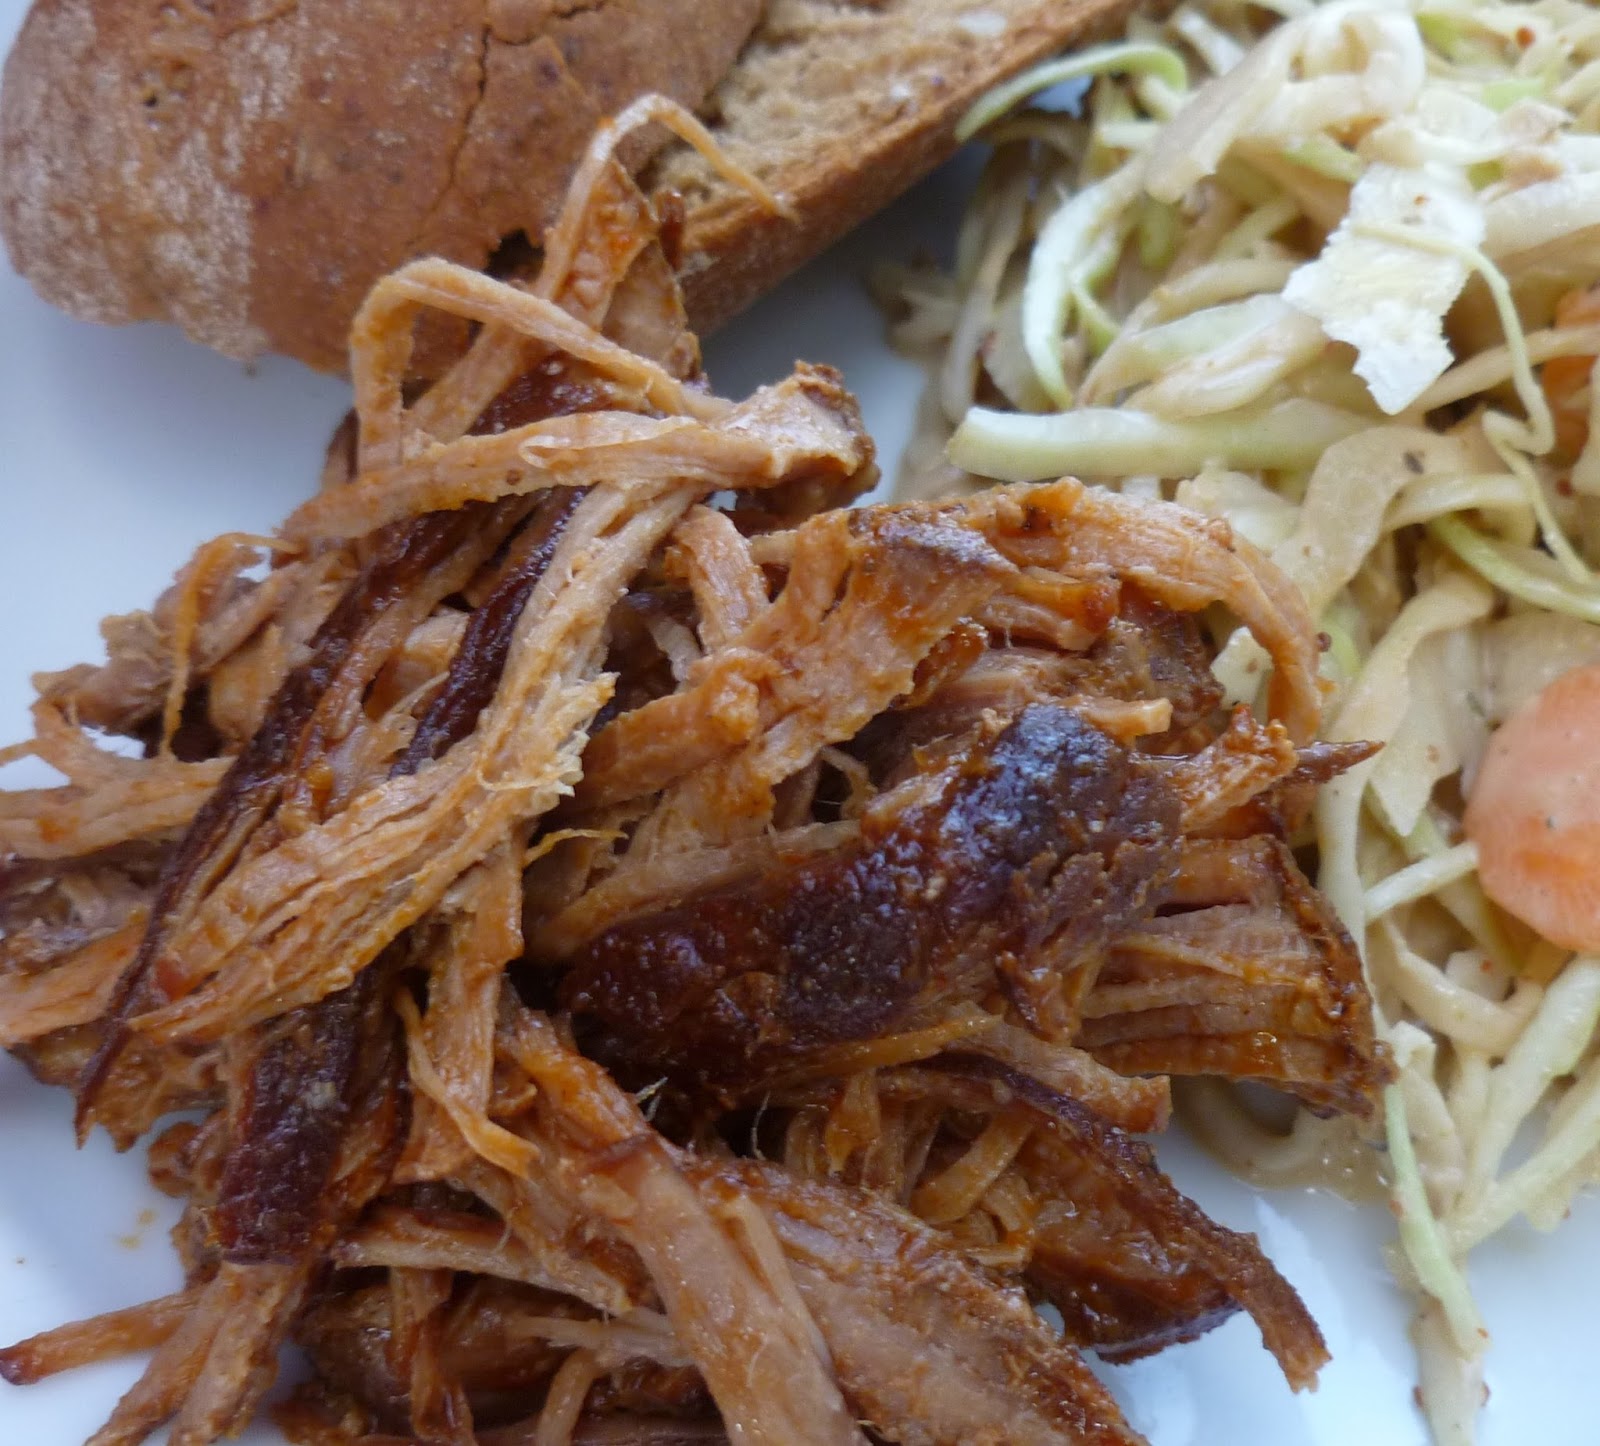 Modified Memphis Coleslaw (great partner for Pulled Pork!)